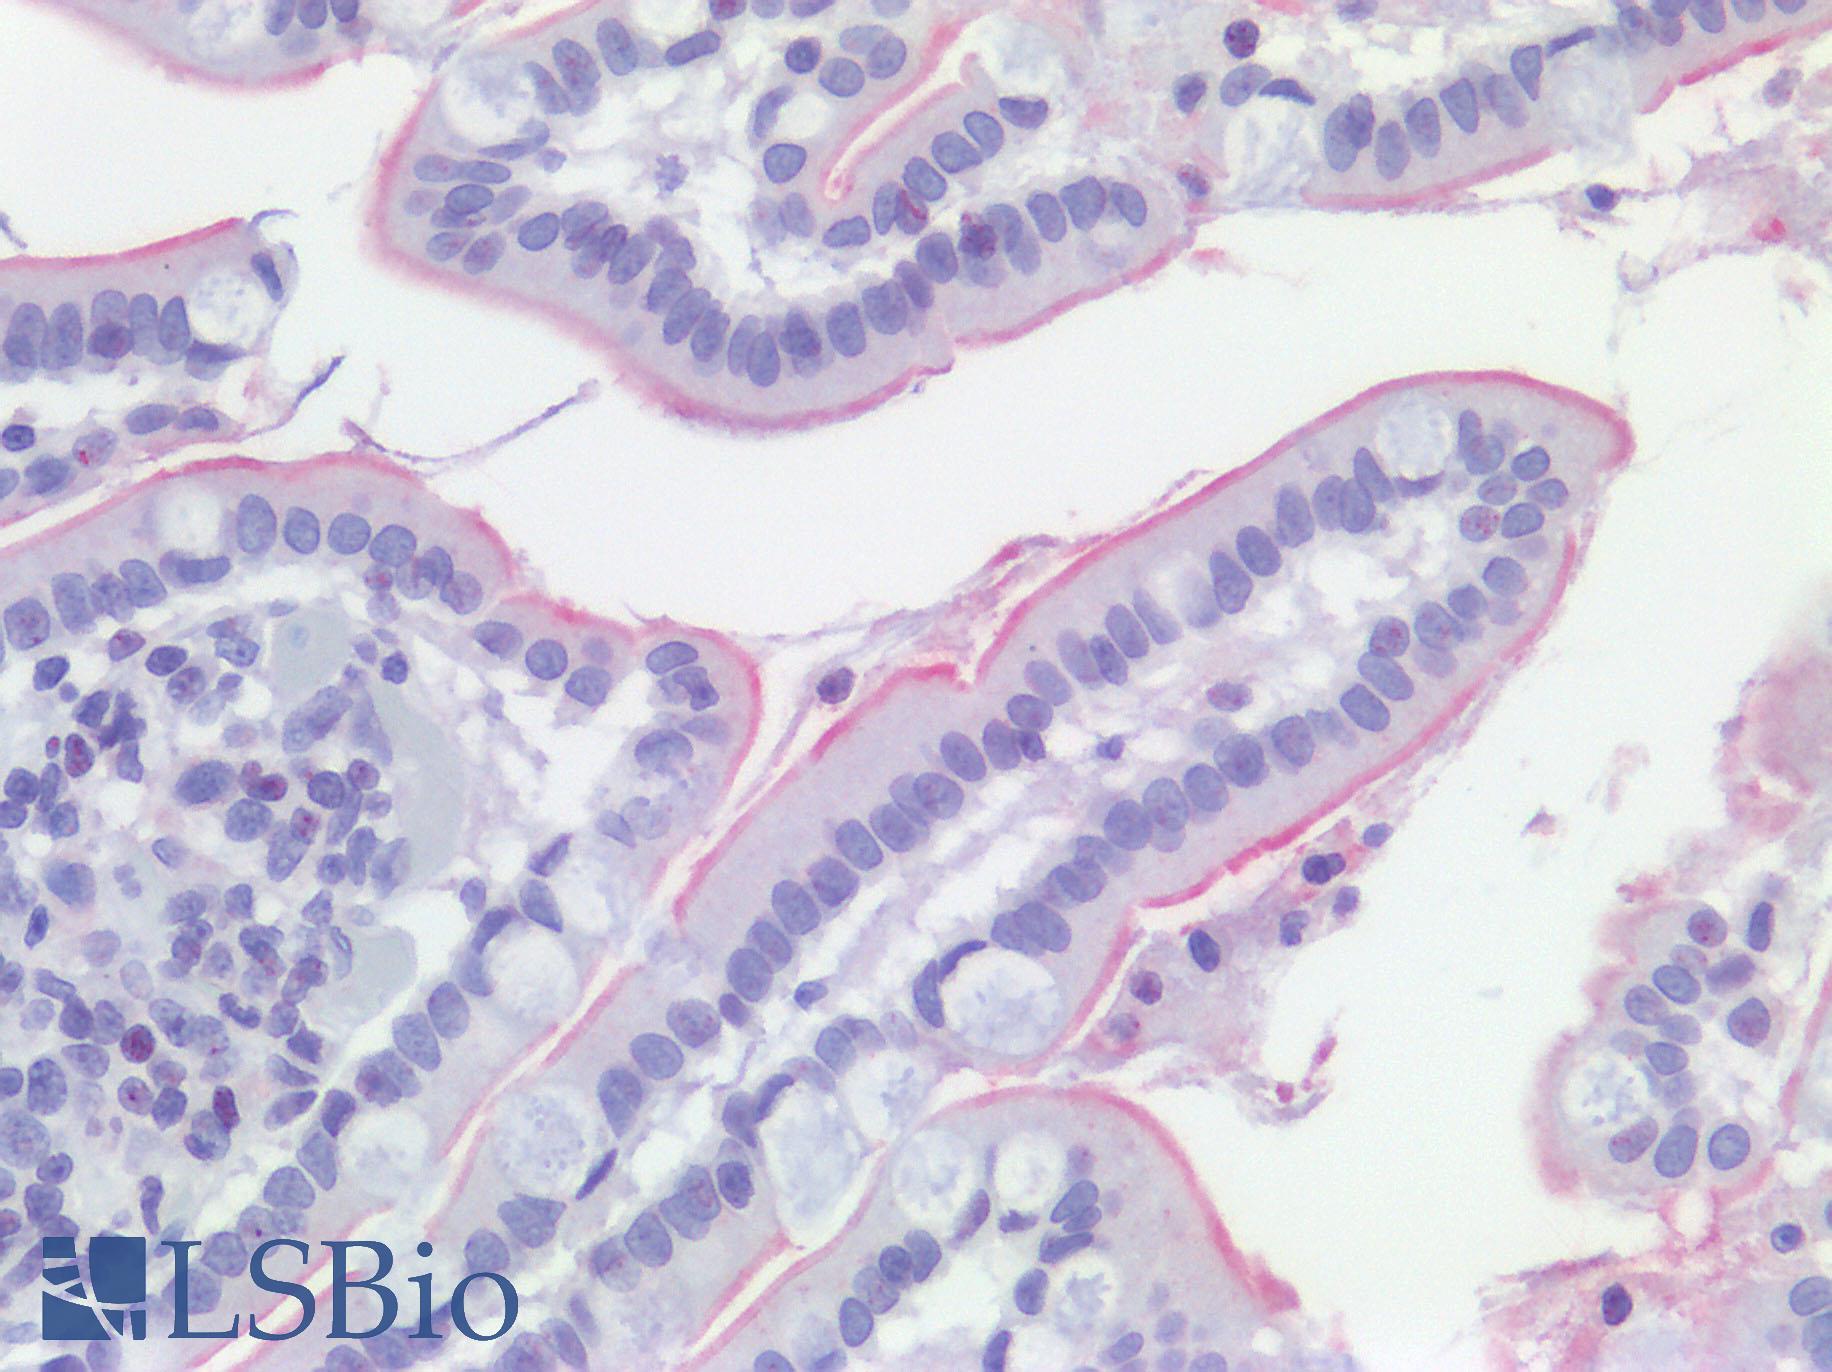 ACE2 / ACE-2 Antibody - Anti-ACE-2 antibody IHC of Human Small Intestine. Positive staining of Enterocyte brush border, all other cell types negative. Immunohistochemistry of formalin-fixed, paraffin-embedded tissue after heat-induced antigen retrieval.